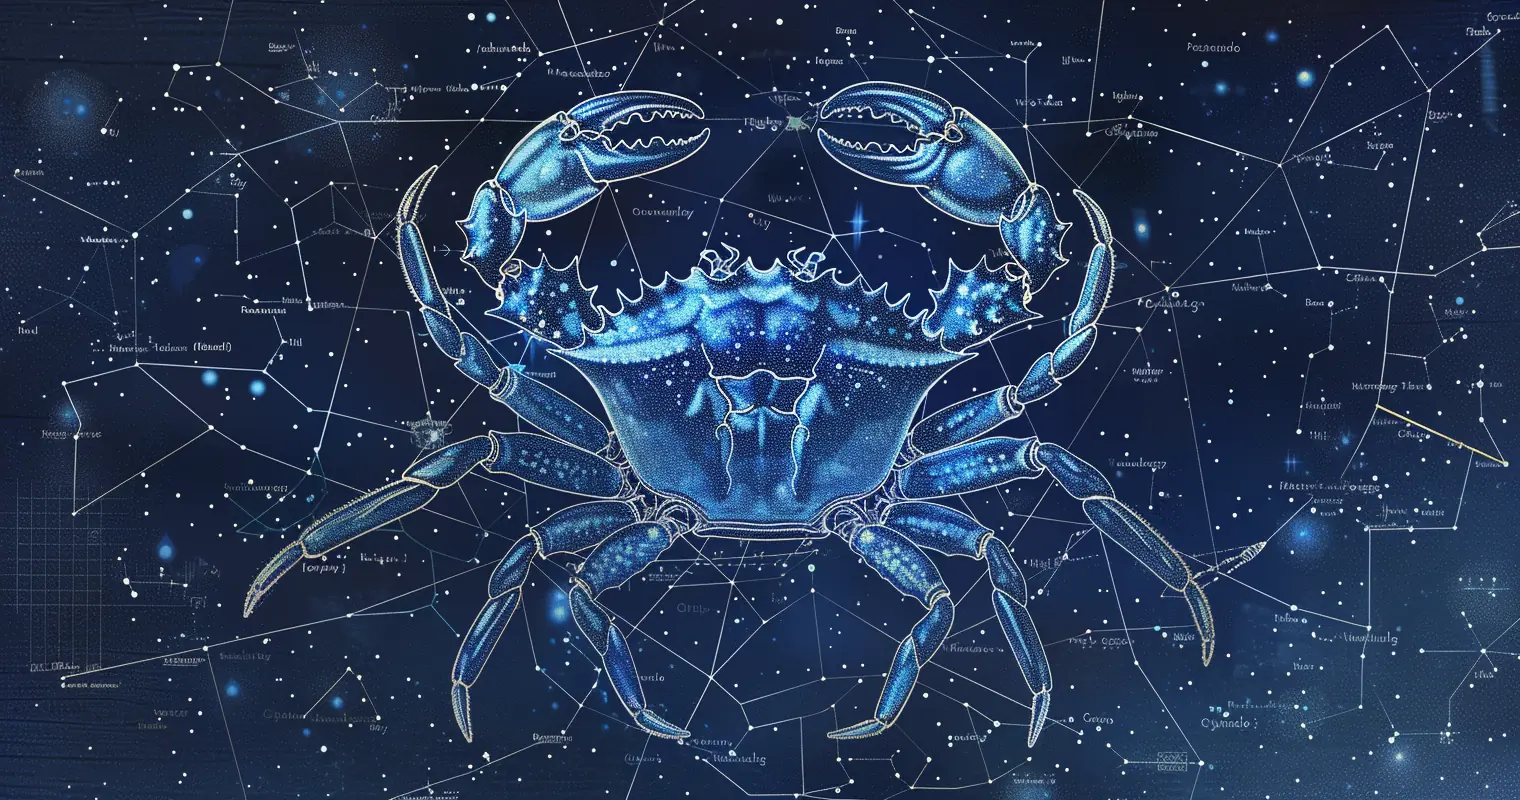 A star chart of a crab constellation